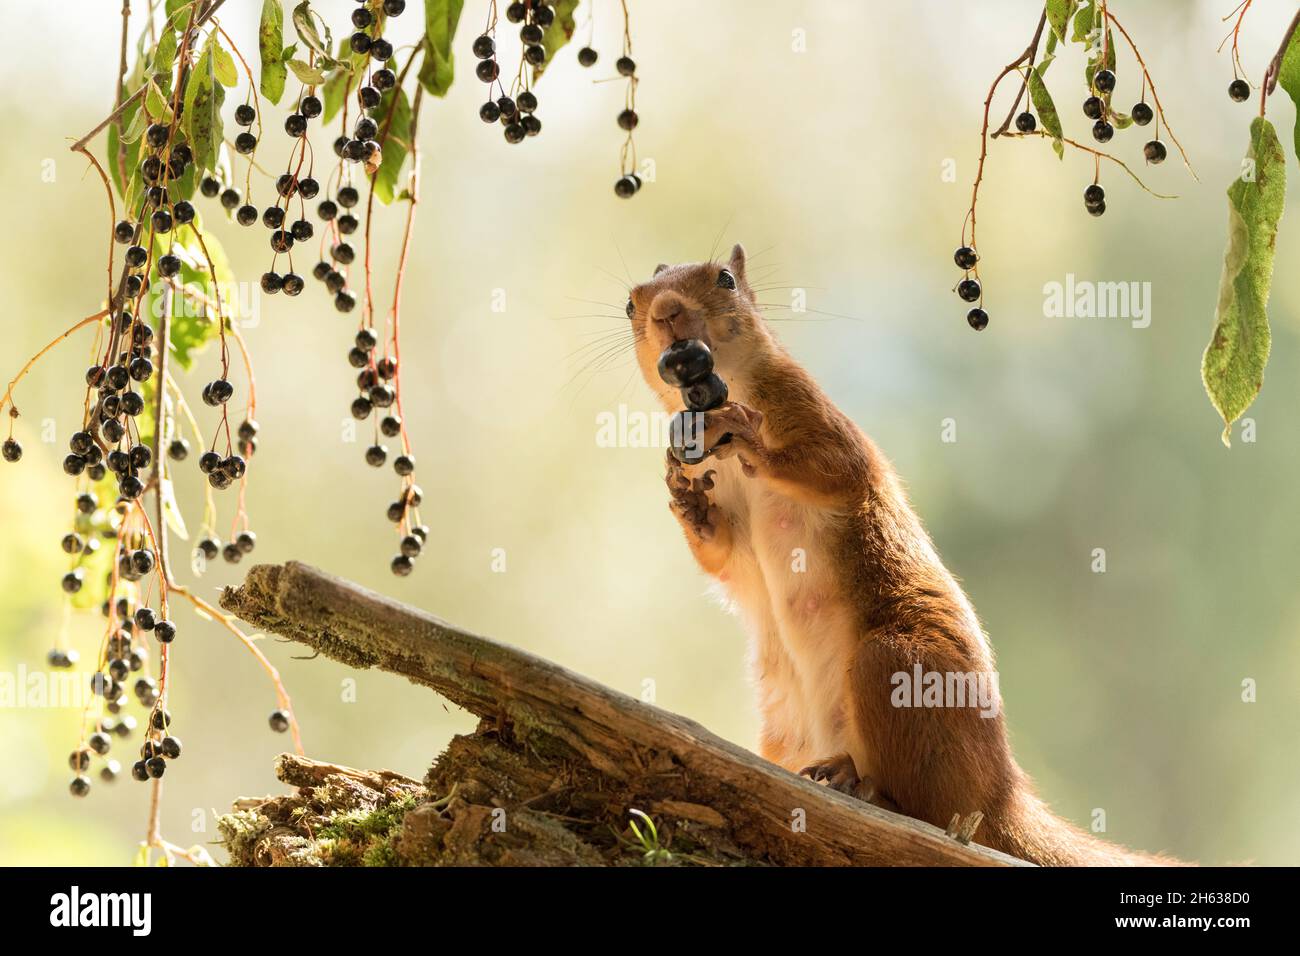 red squirrel is eating blueberries Stock Photo